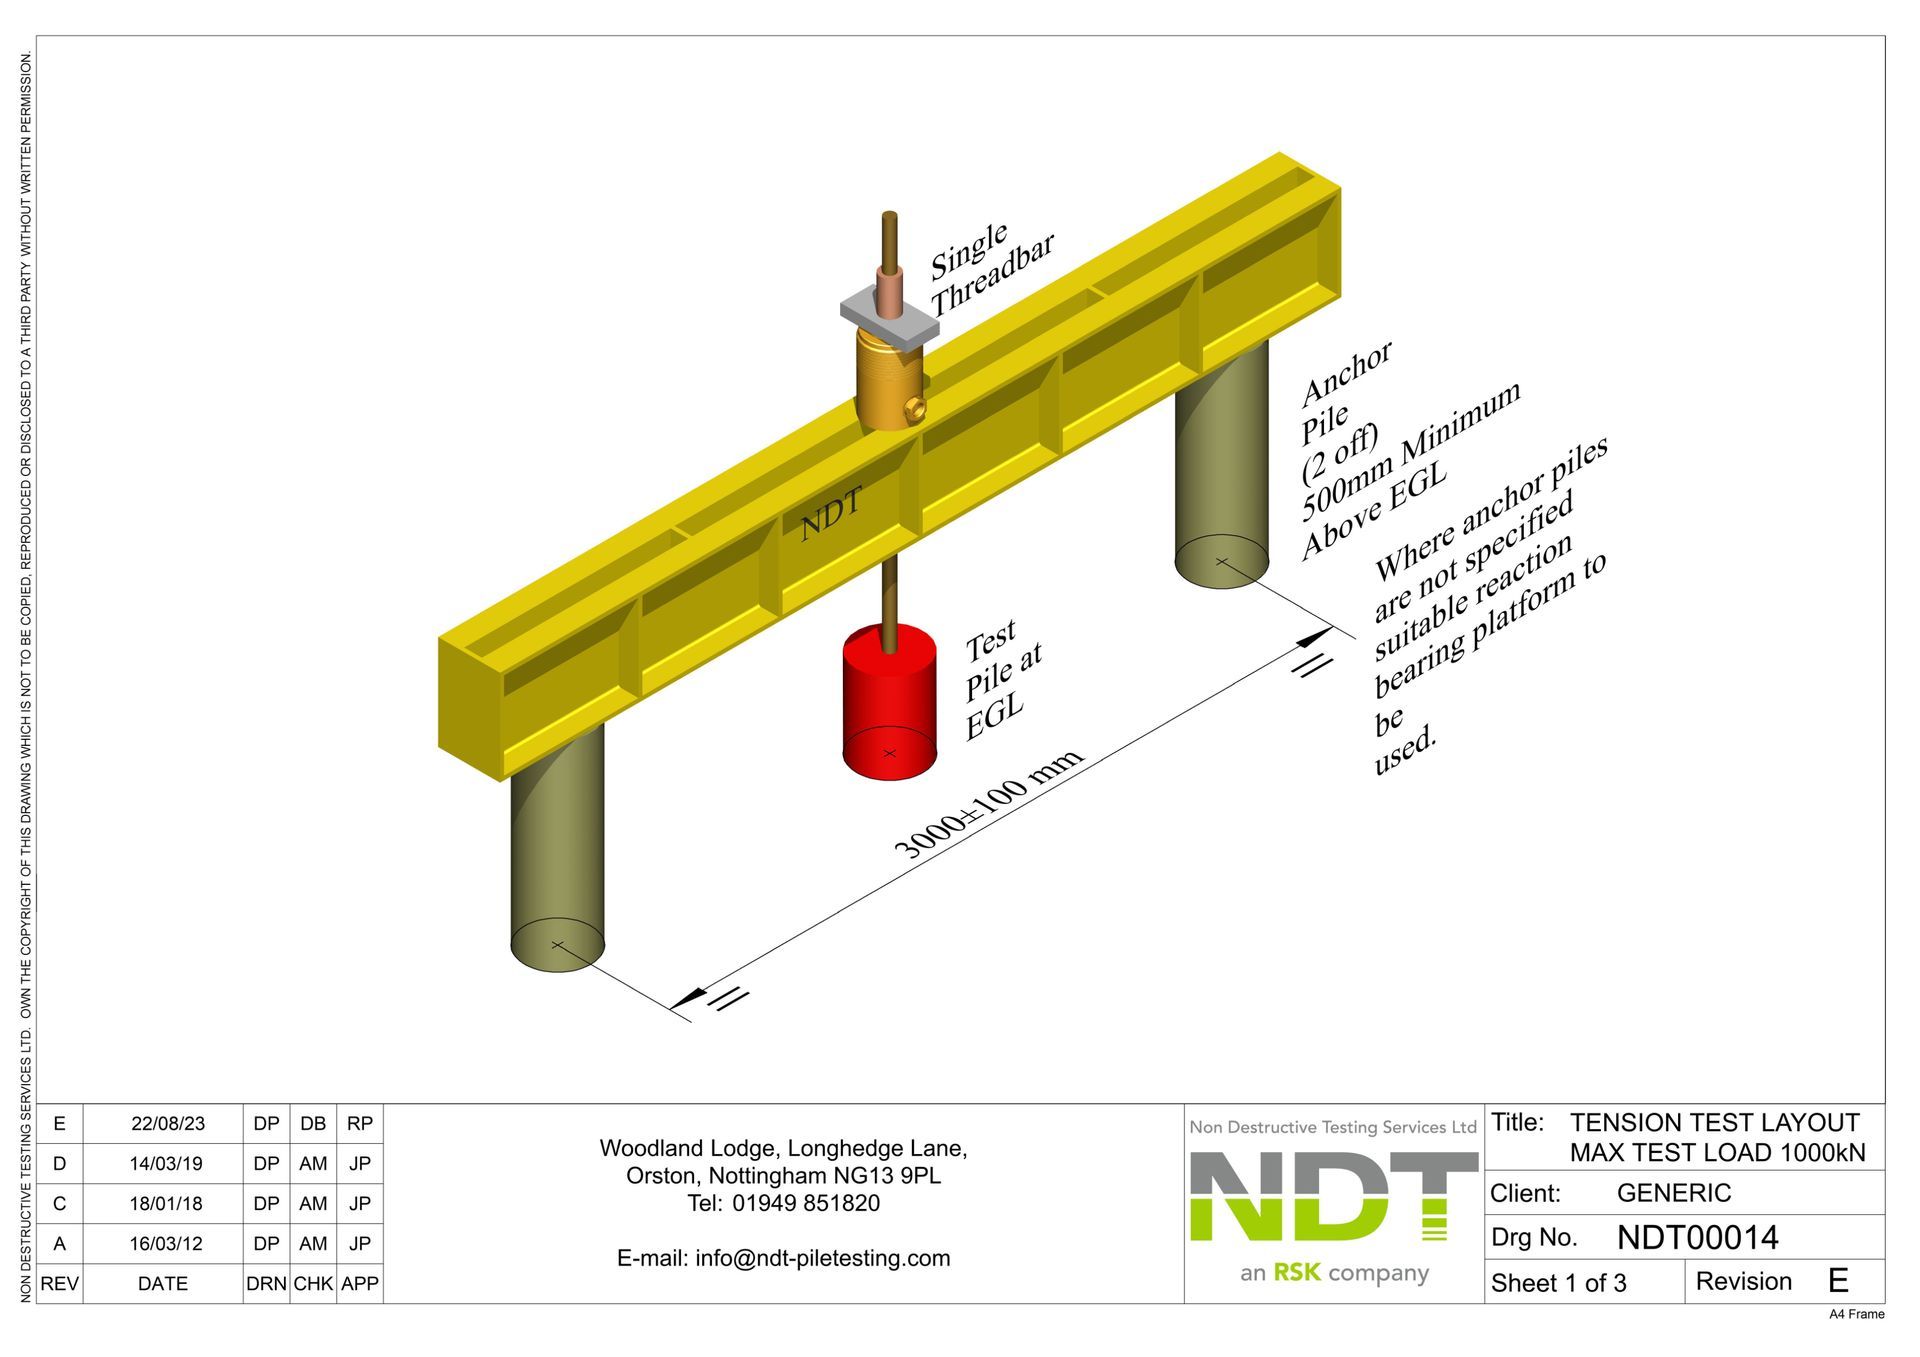 Tension Test Layout NDT 00101 (1000kN)